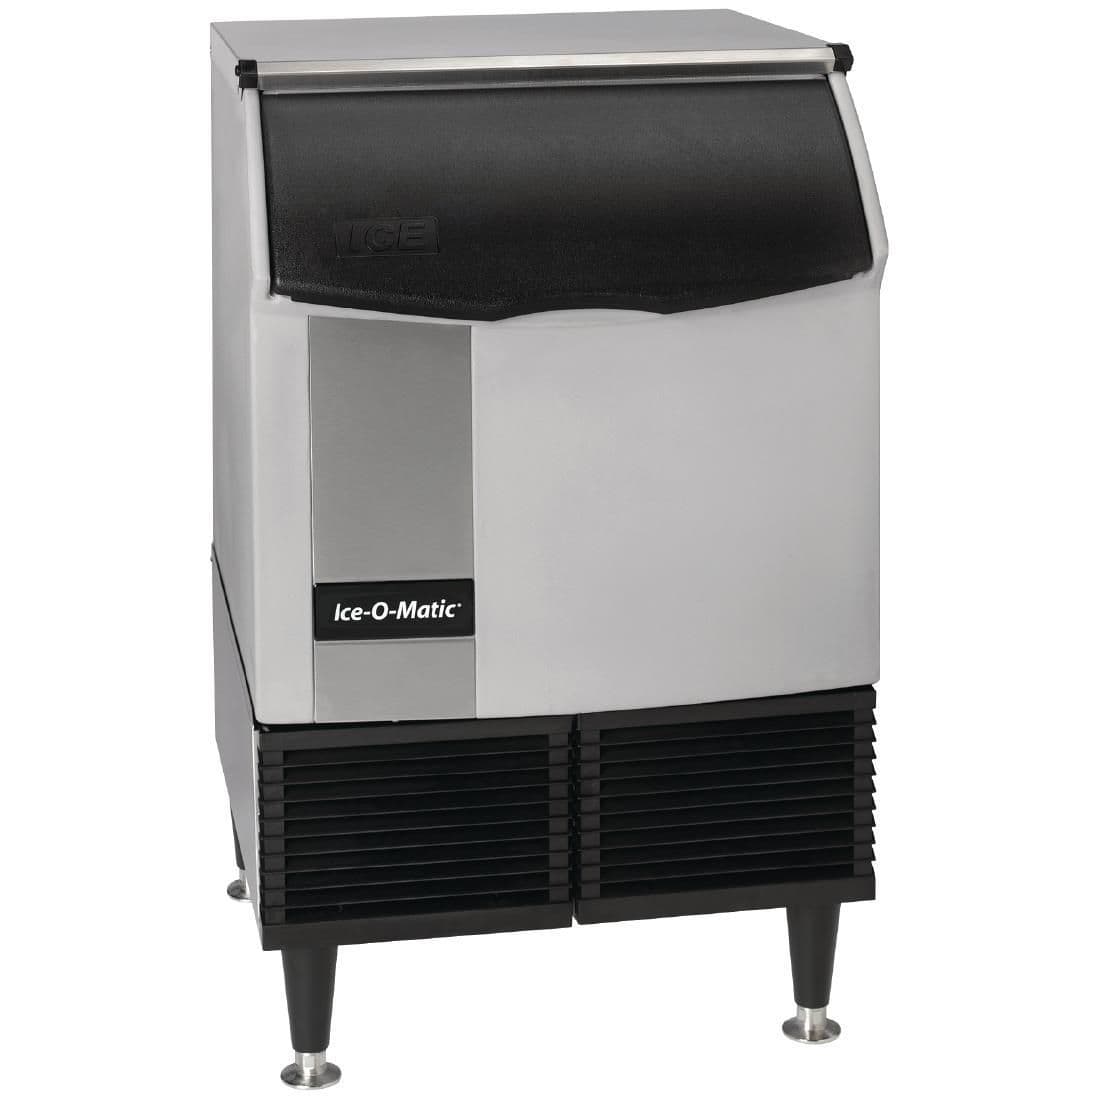 DL067 Ice-O-Matic Full Cube Ice Machine 96kg Output ICEU225F JD Catering Equipment Solutions Ltd